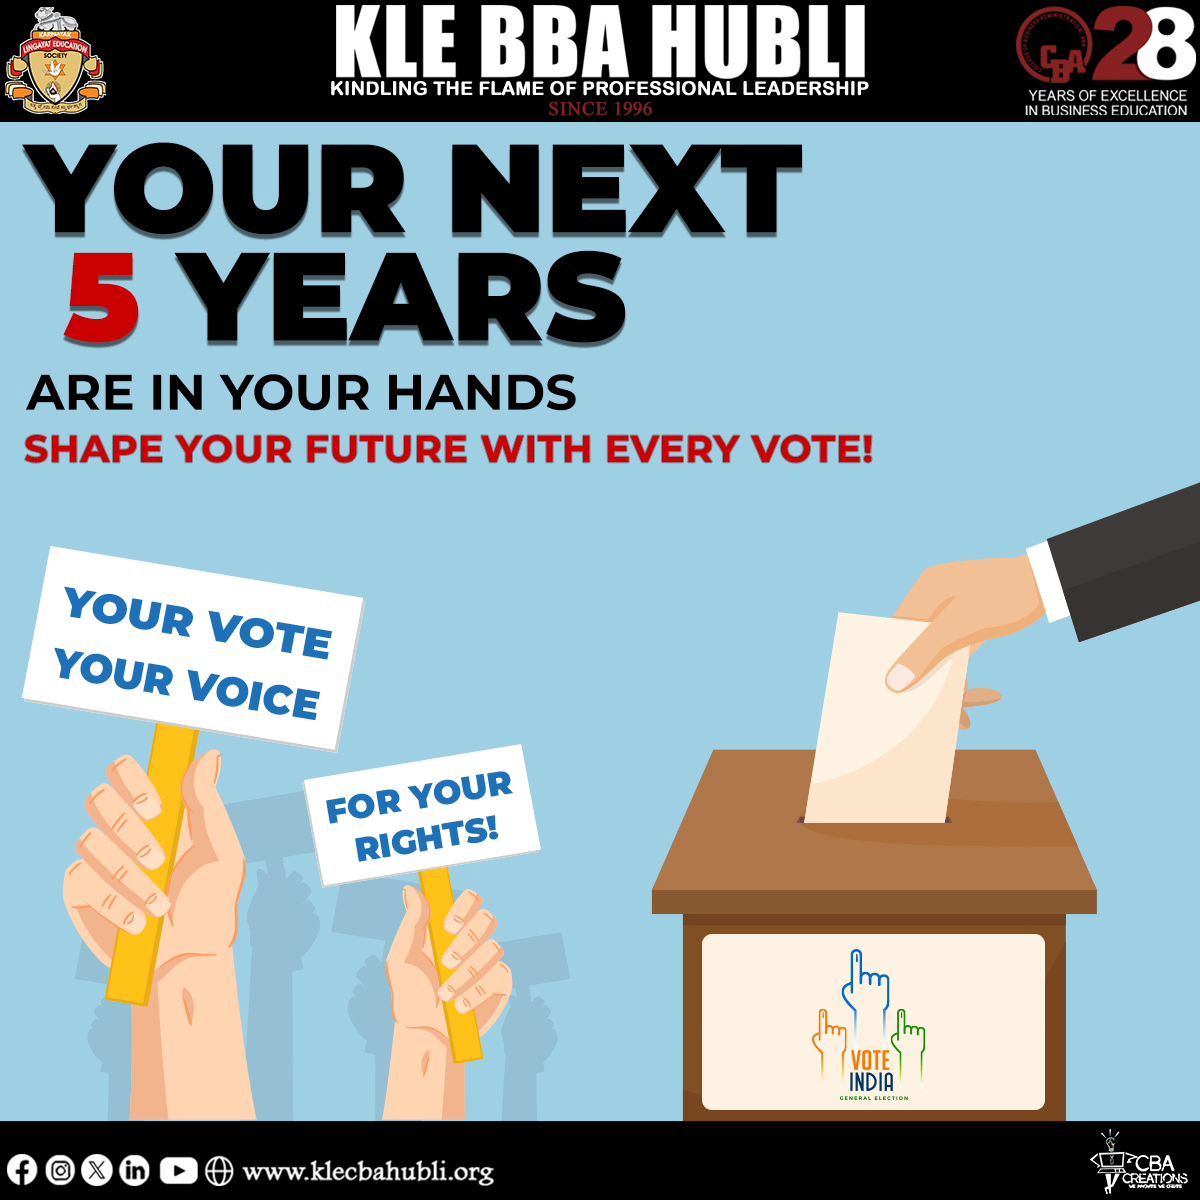 A vote for today is a step towards a better tomorrow....Make your voice heard by casting your precious vote 🗳️

#votingrights #votingmatters
#meraphelavotedeshkeliya
#vote2024 #28yearsofexcellenceyearsofexcellence #klebbahubballi
#kebbahubli#topbbacollegeinhubli